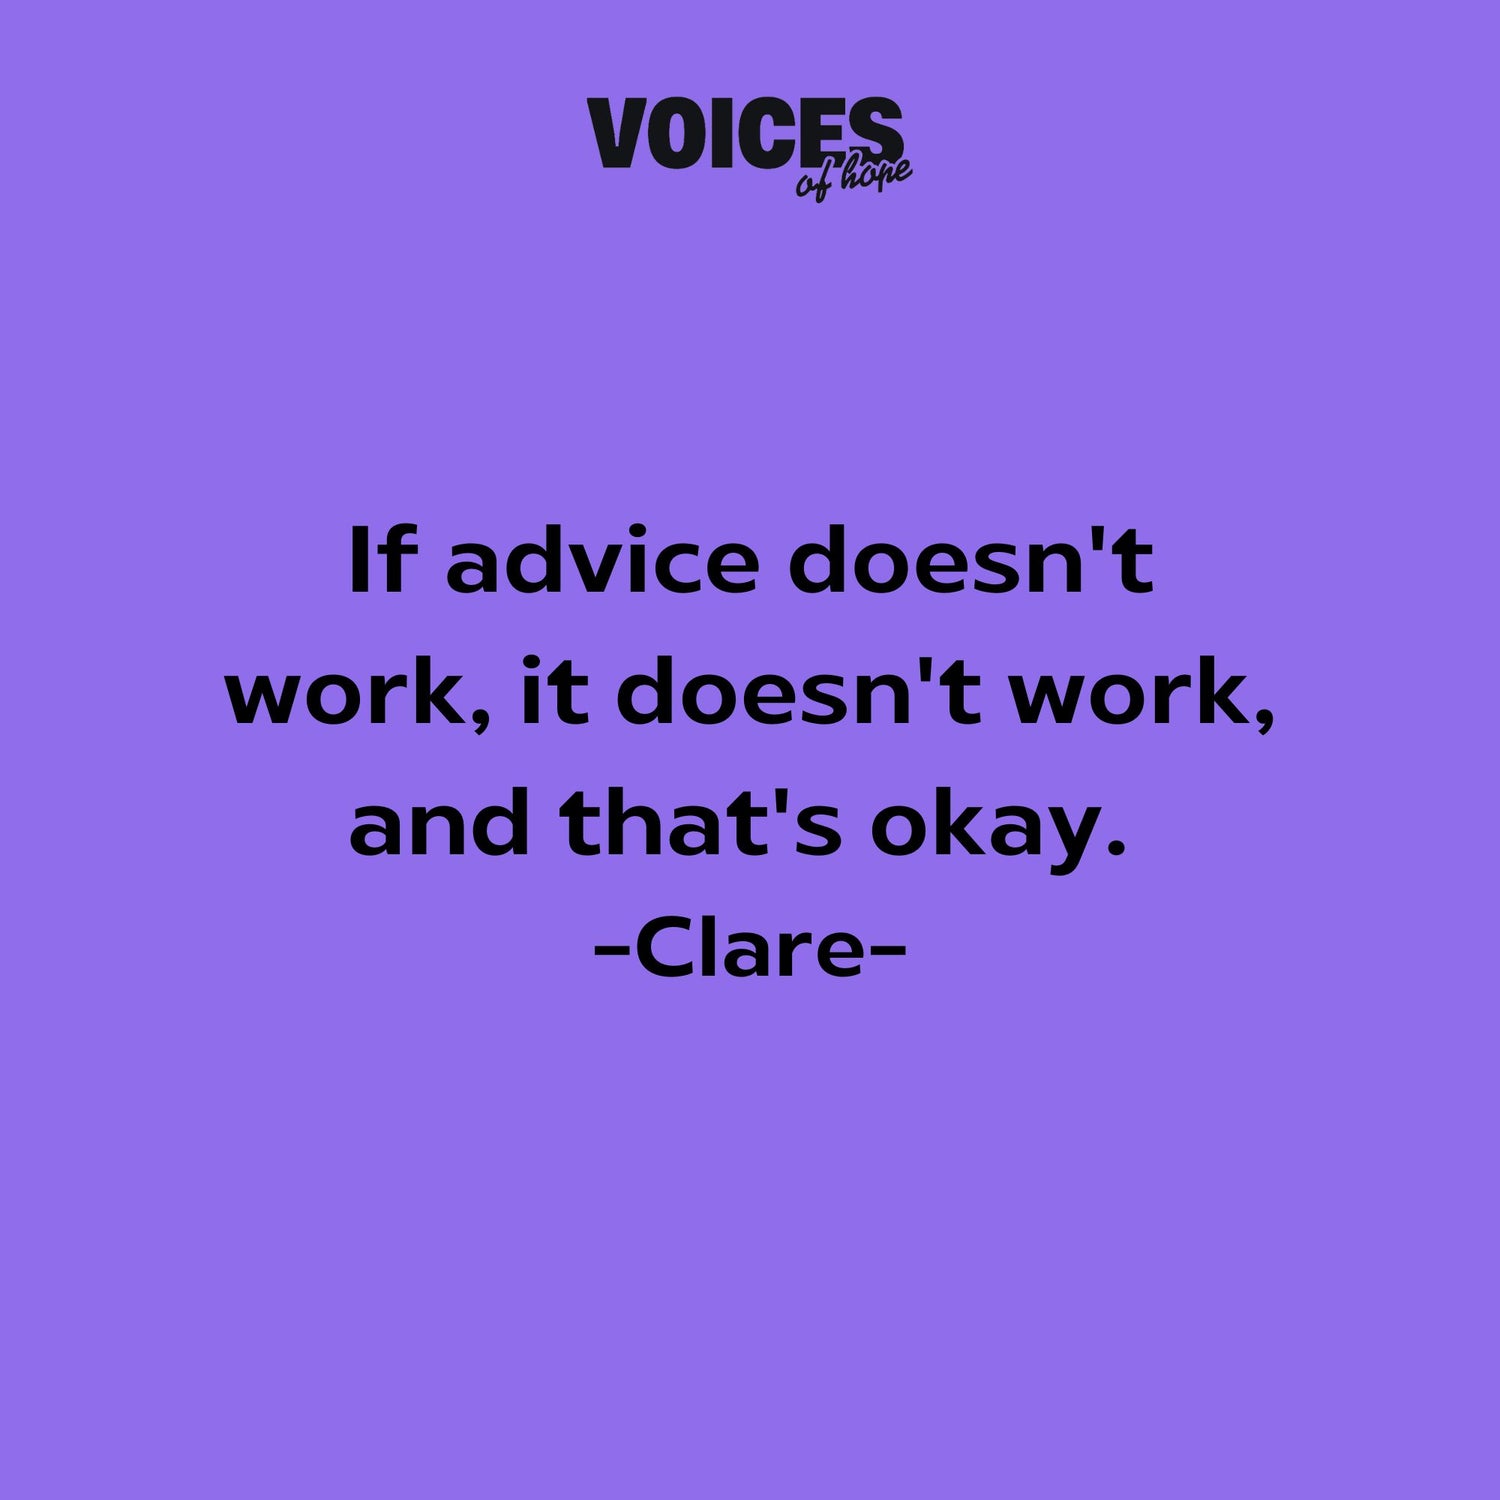 Purple background with black writing that reads: "if advice doesn't work, it doesn't work, and that's okay. Clare."